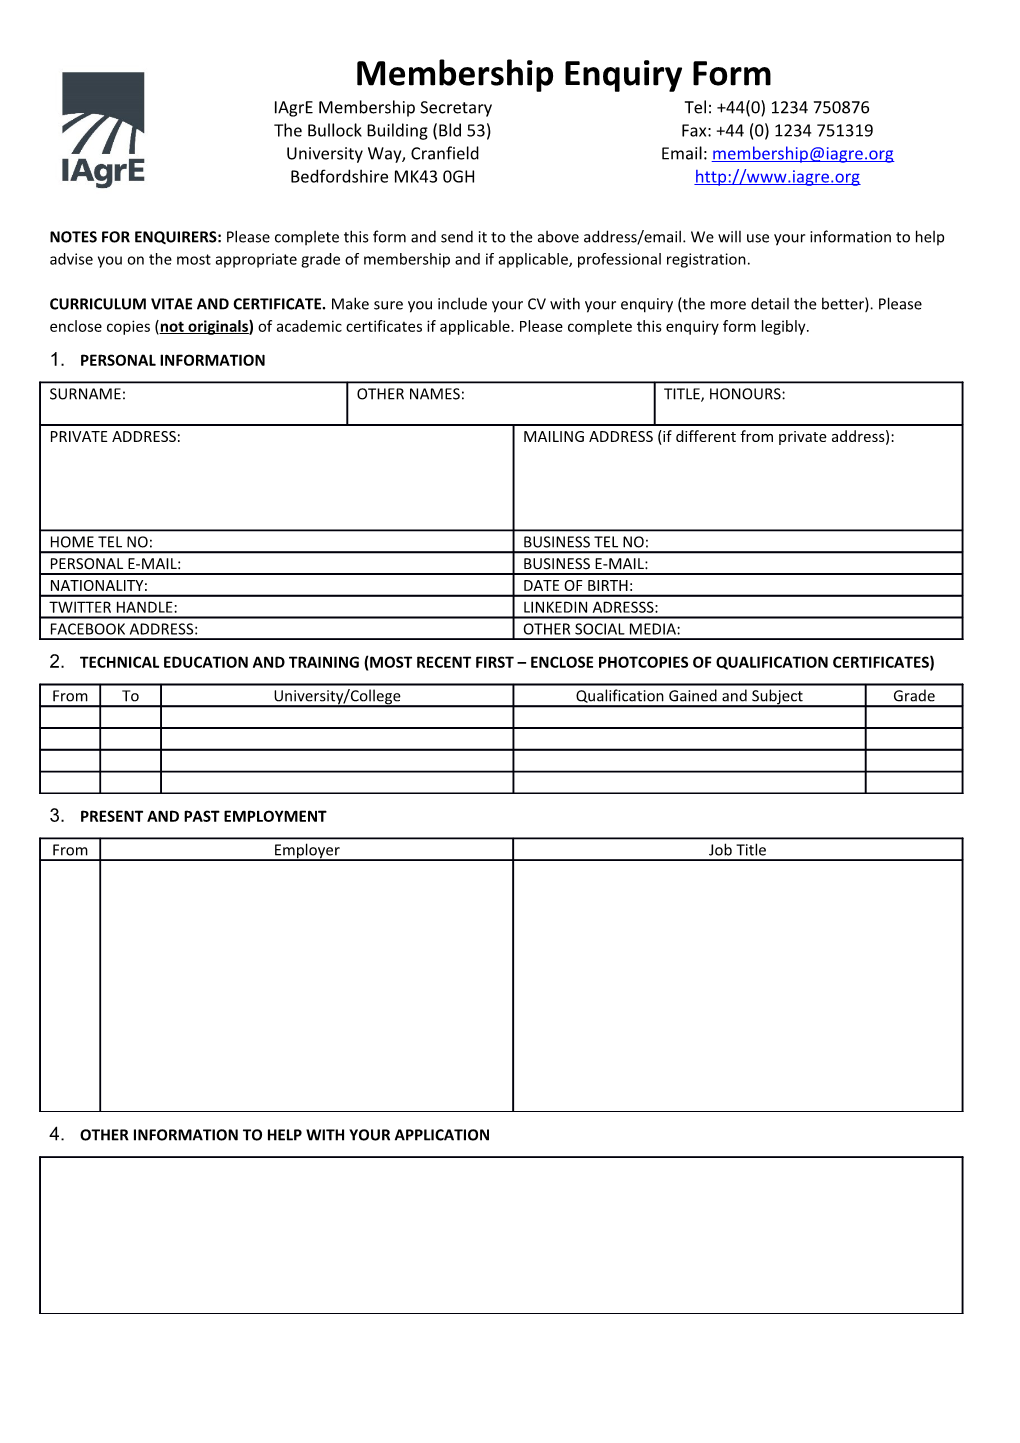 NOTES for Enquirers: Please Complete This Form and Send It to the Above Address/Email